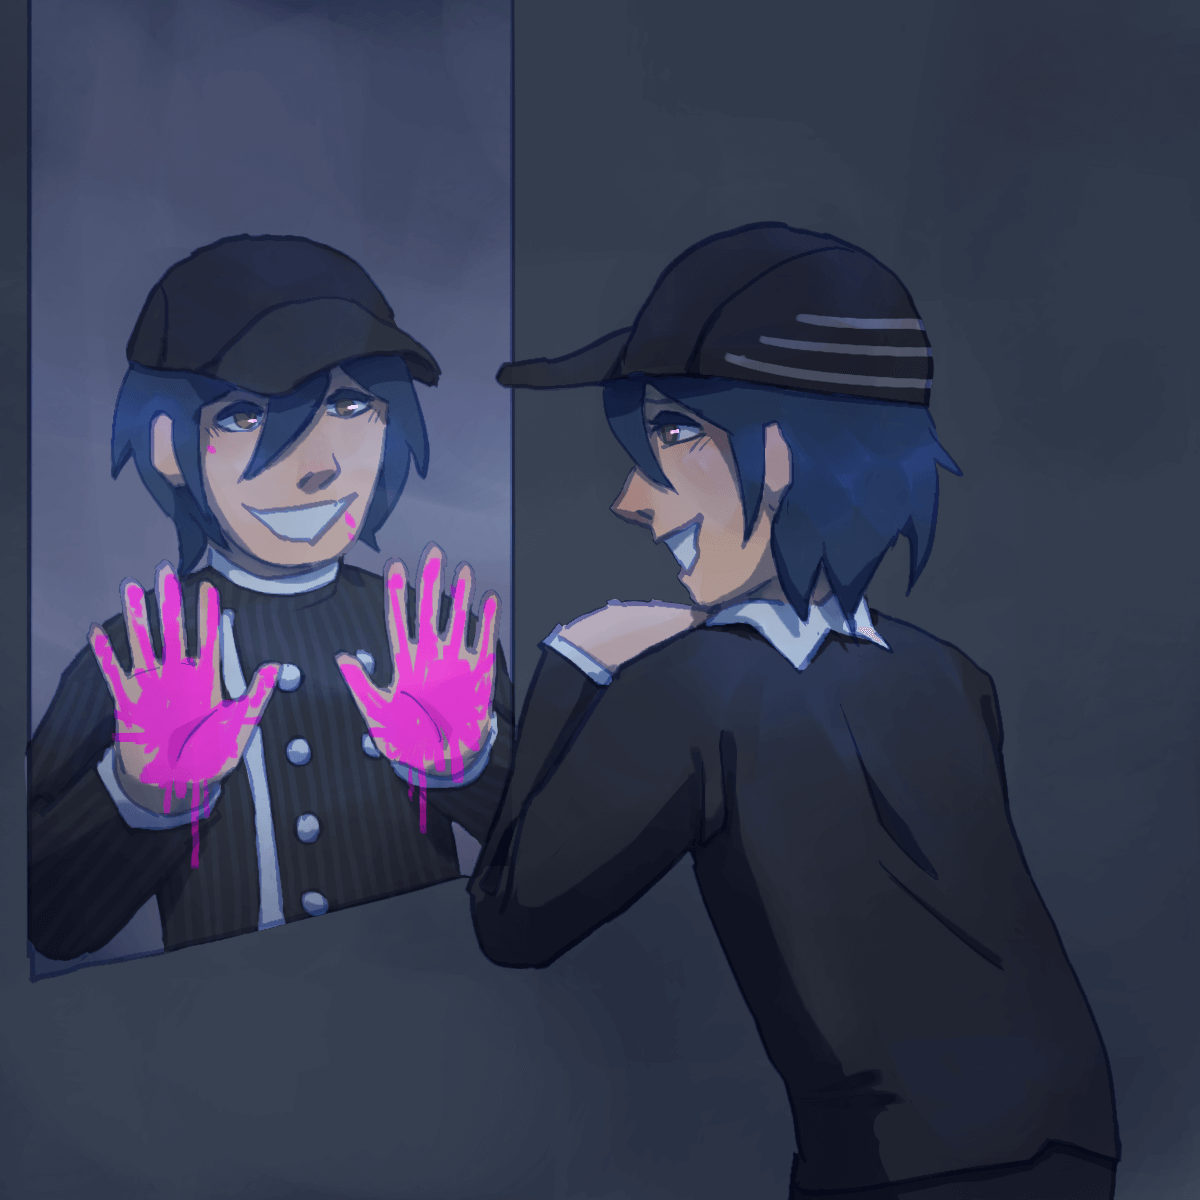 a drawing of pre-game shuichi looking at an imagined version of his in-game self
		in the mirror. both are smiling at each other. in-game shuichi's hands are full of blood.